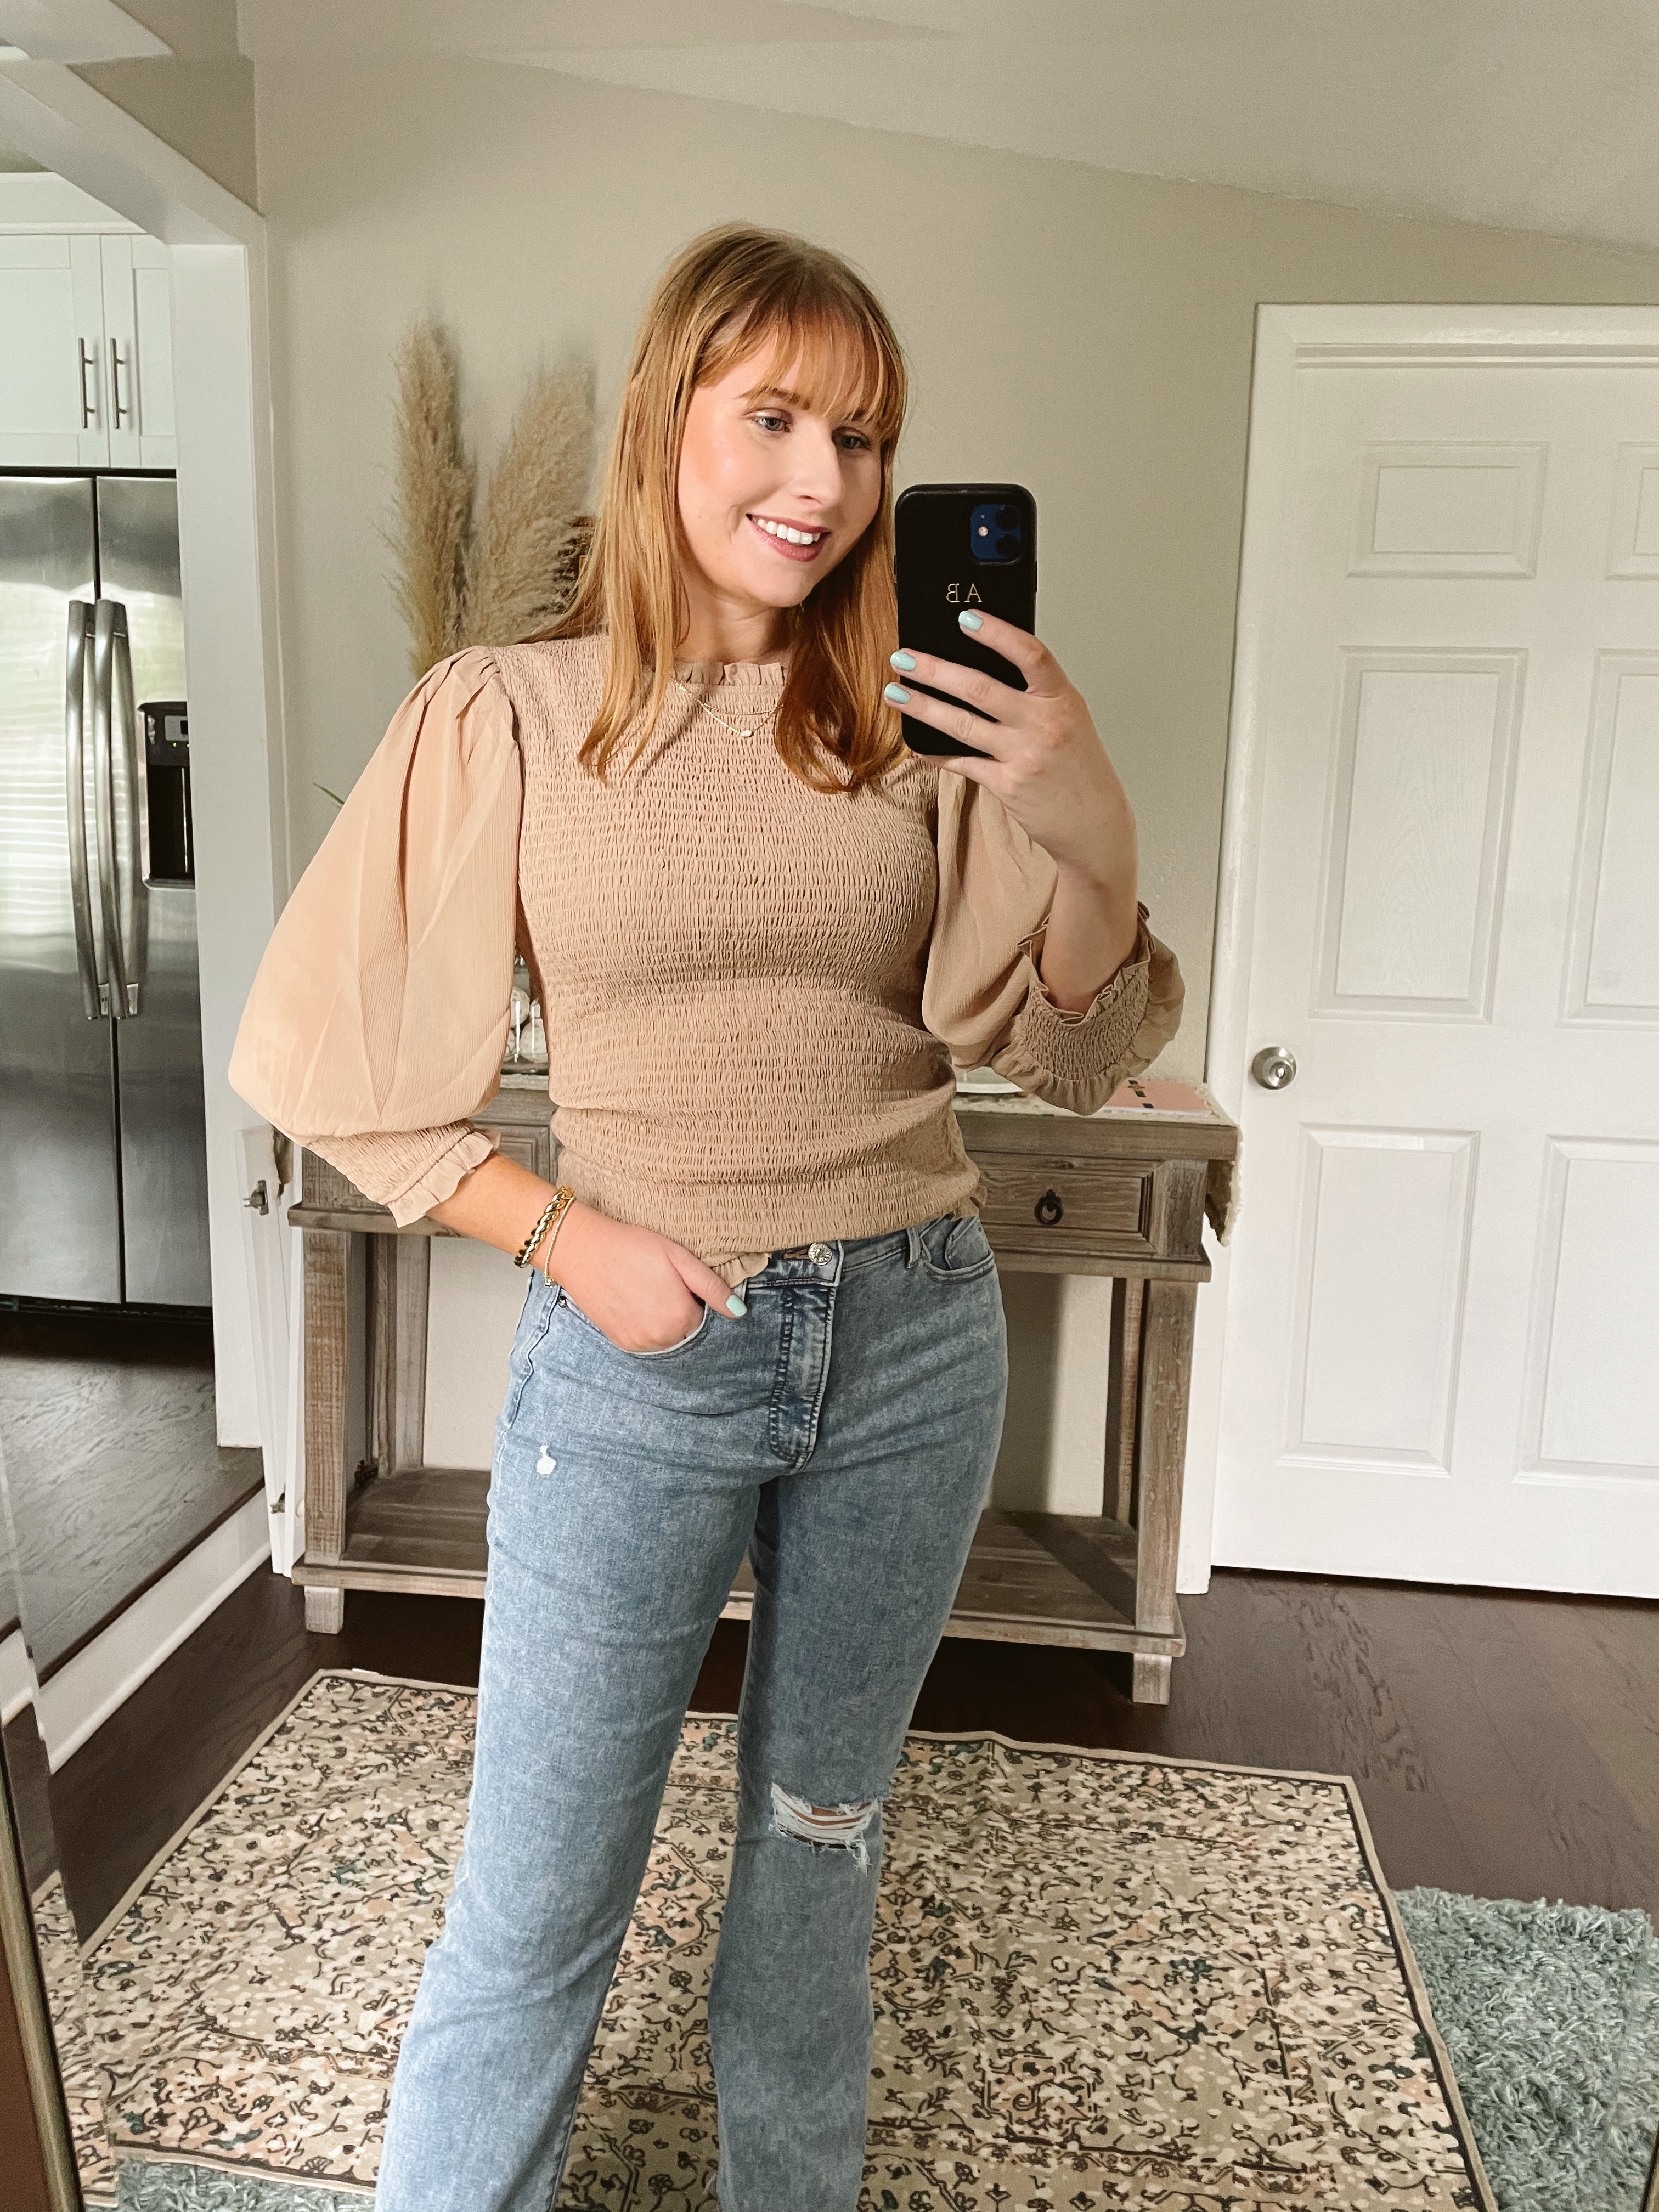 Express Work Outfit Ideas and Spring Looks | Affordable by Amanda shares casual Spring outfit ideas from Express.